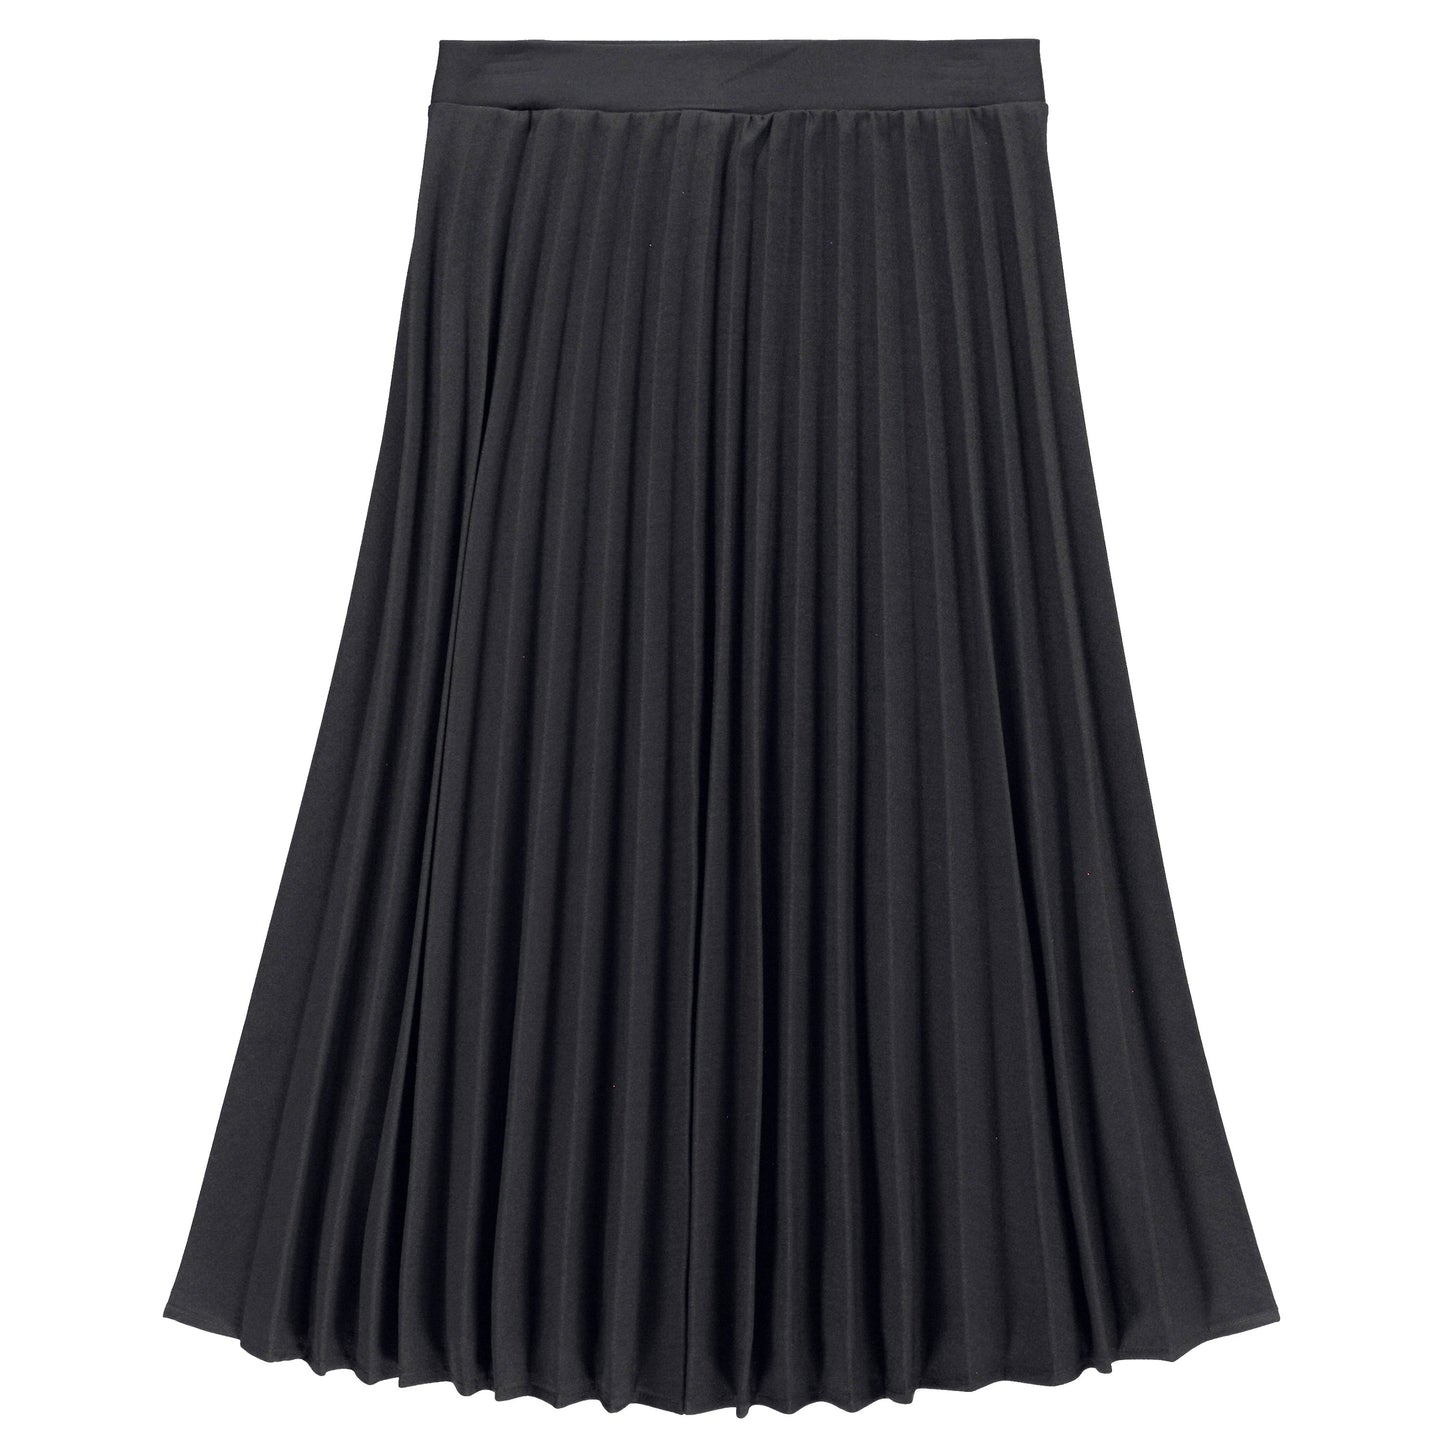 The Perfect Stick Pleated Skirt